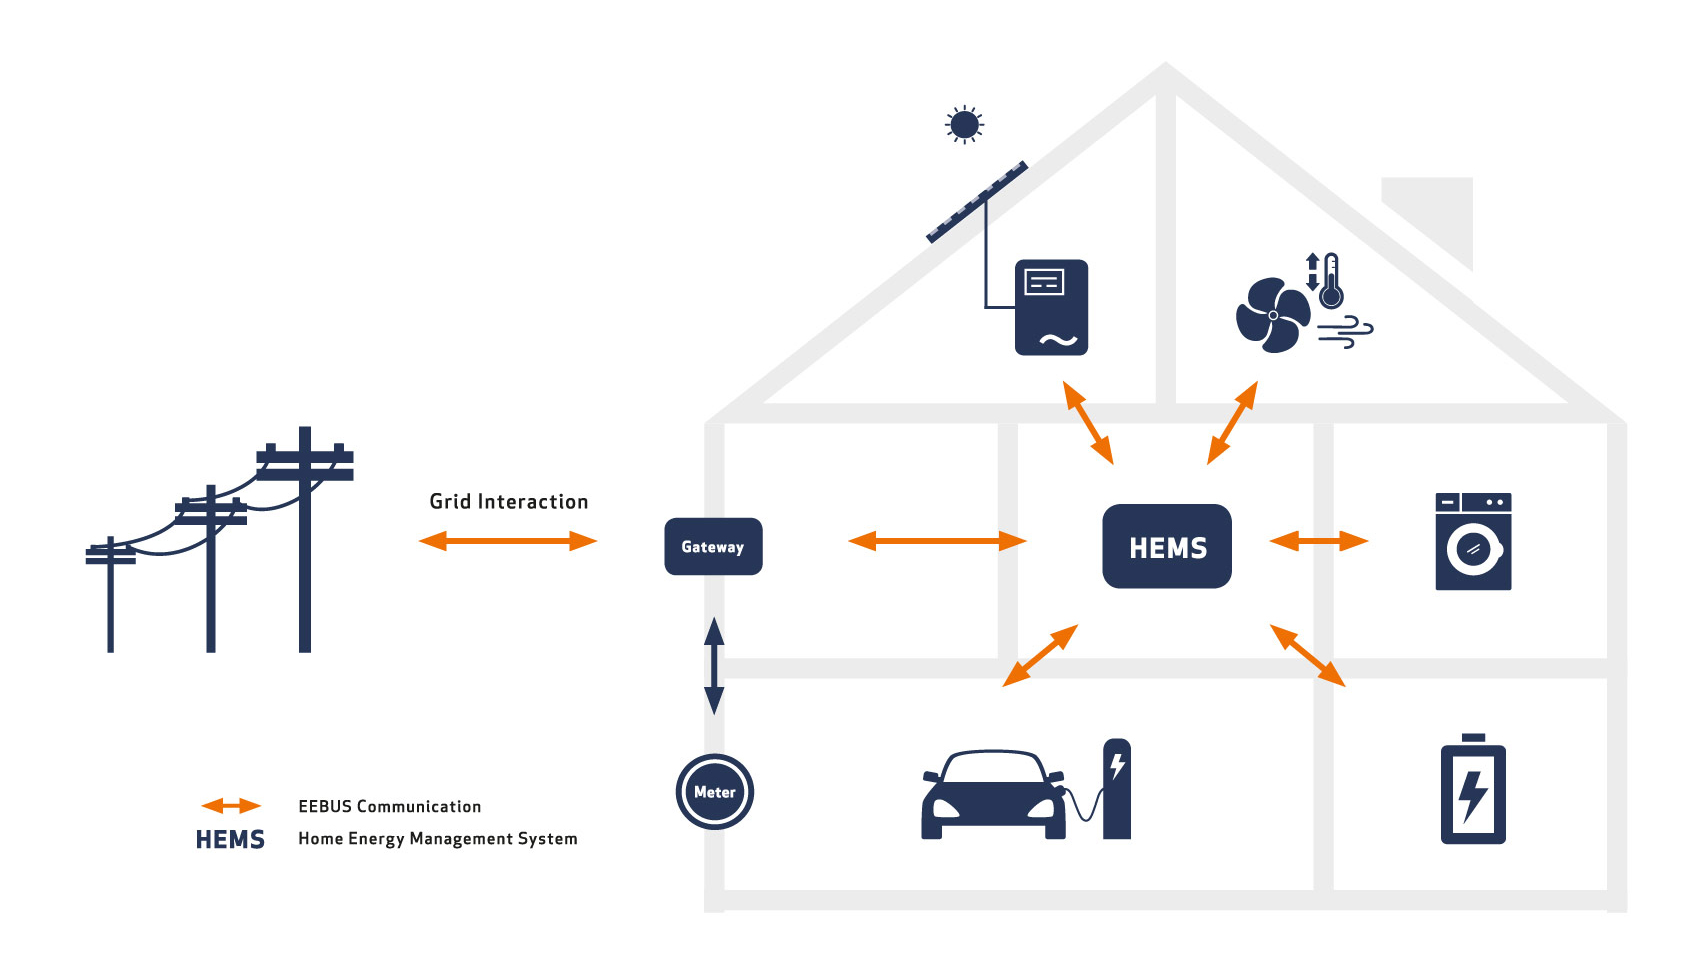 An energy management system coordinates all energy-relevant generators and consumers in the networked building.